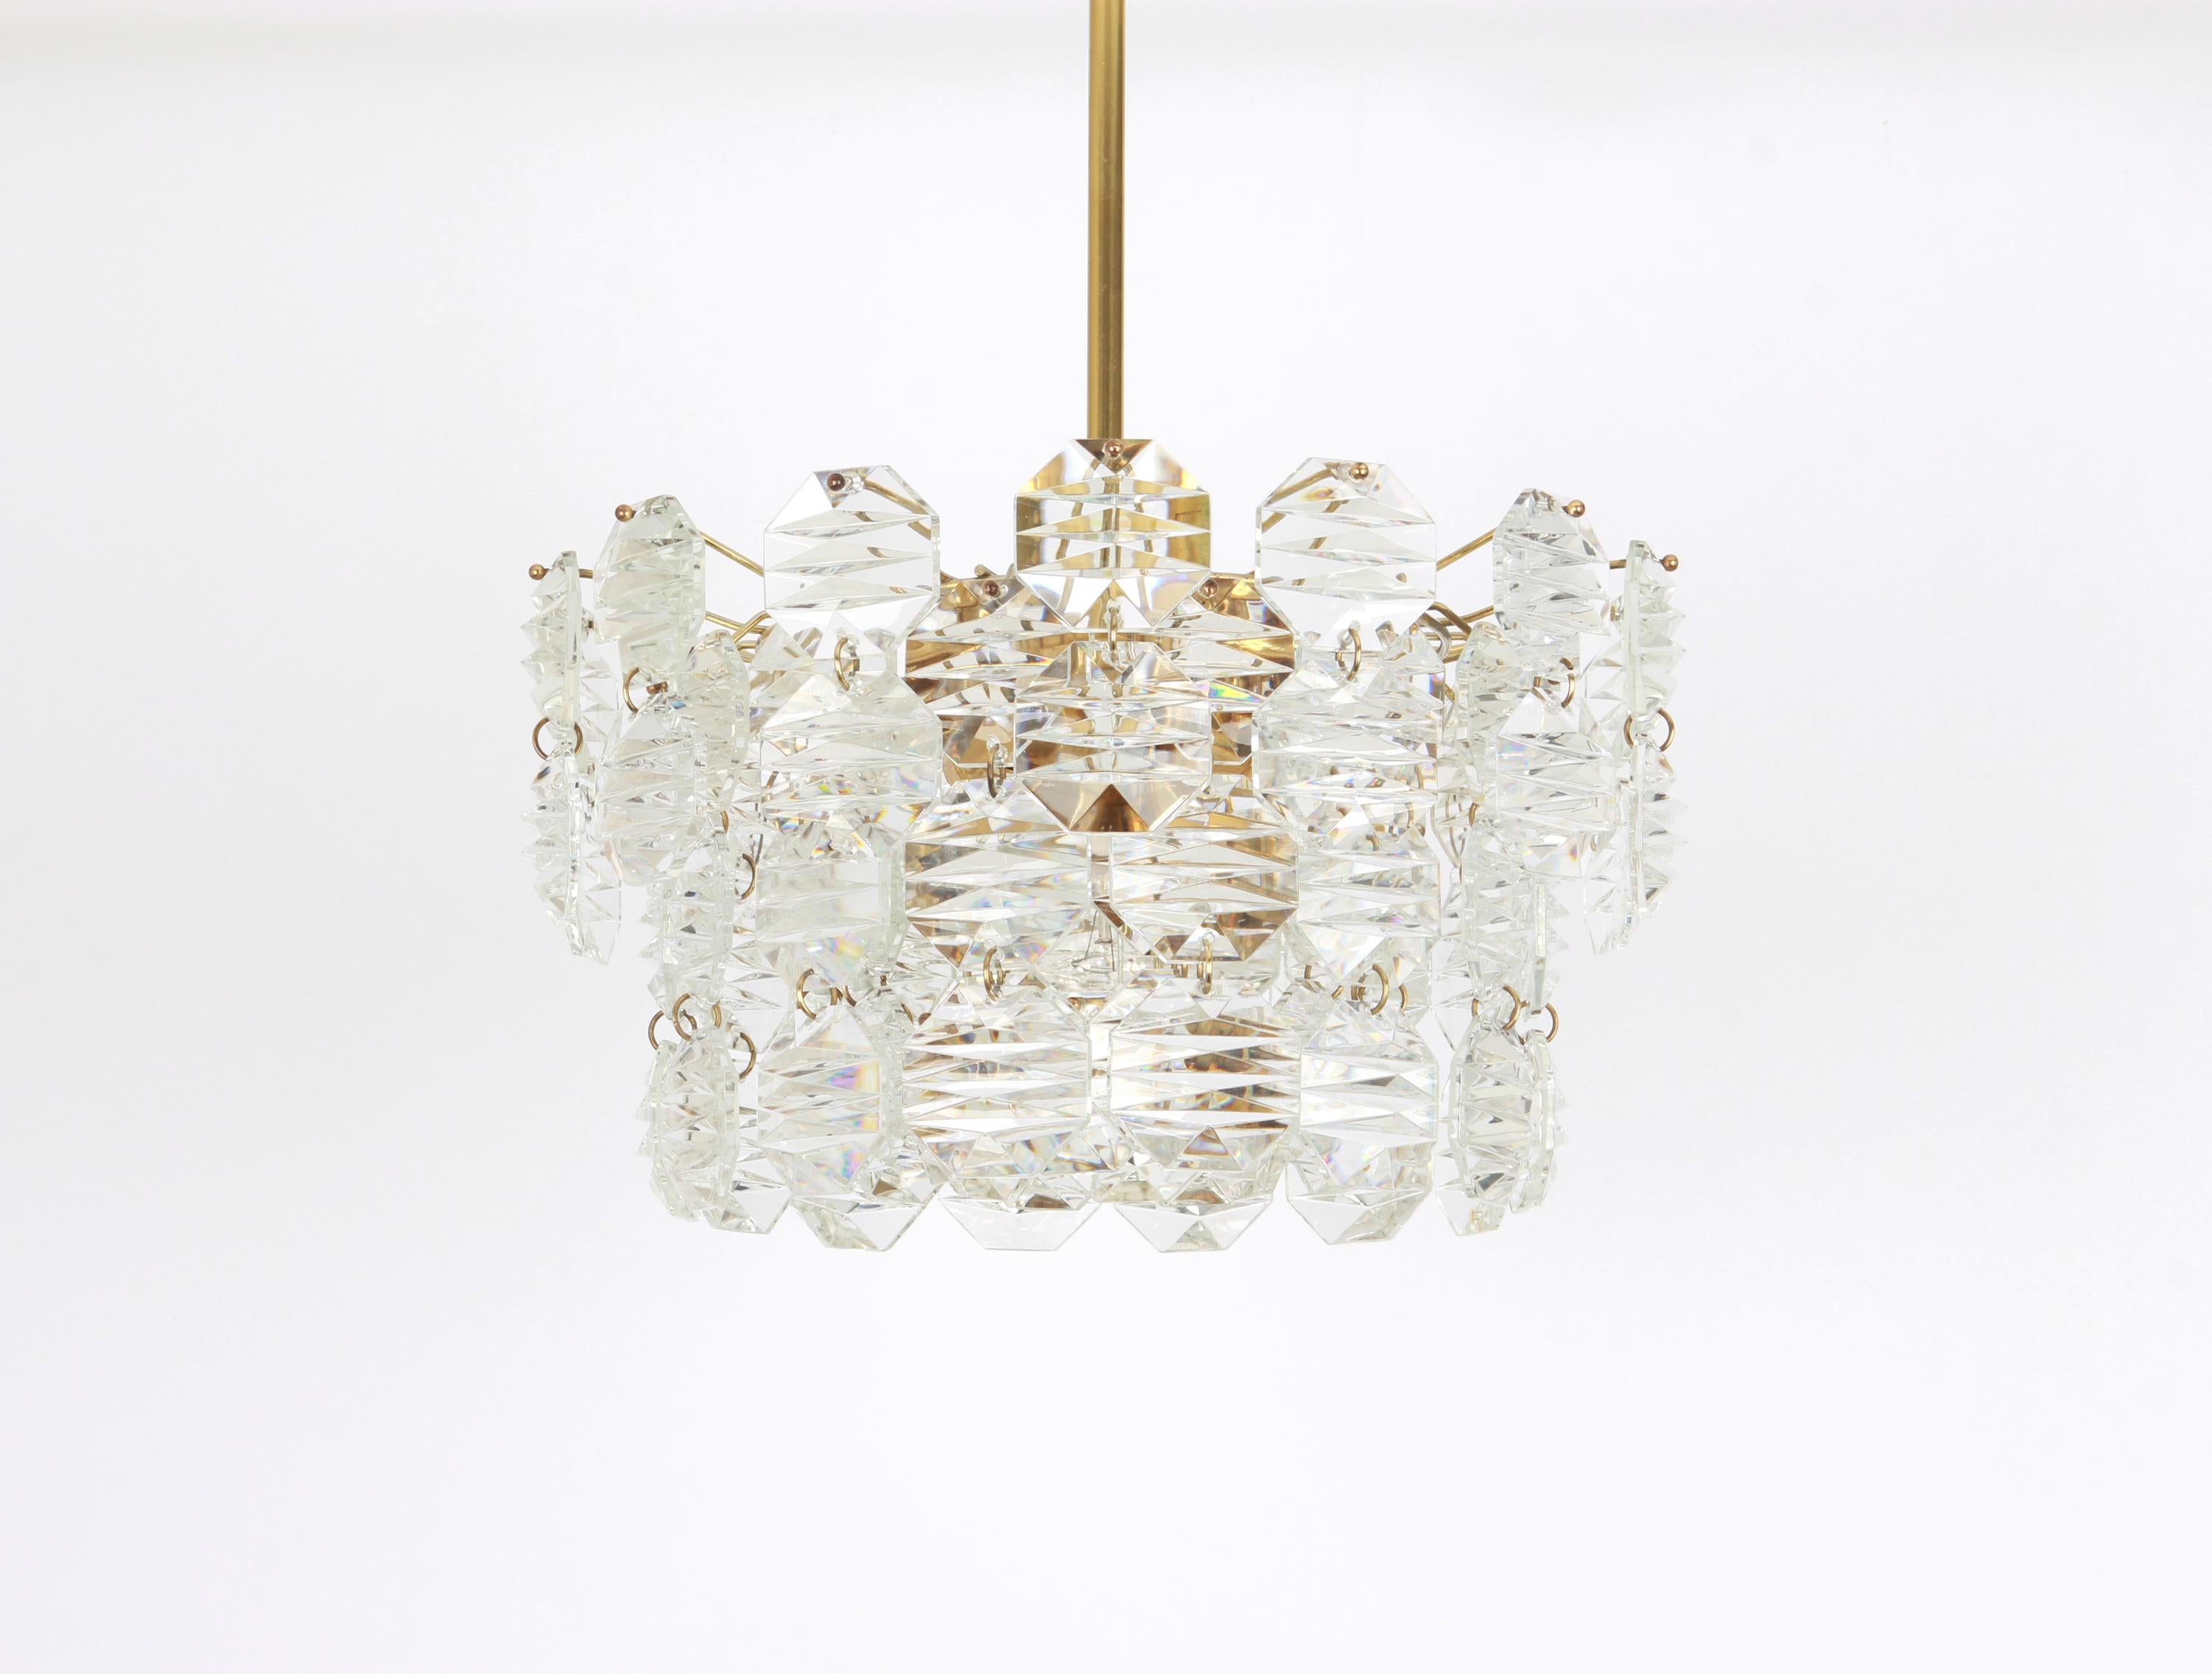 A stunning five-tier chandelier by Kinkeldey, Germany, manufactured in circa 1970-1979. A handmade and high quality piece. The chandelier features a brass frame with lots of facetted crystal glass elements.

High quality and in very good